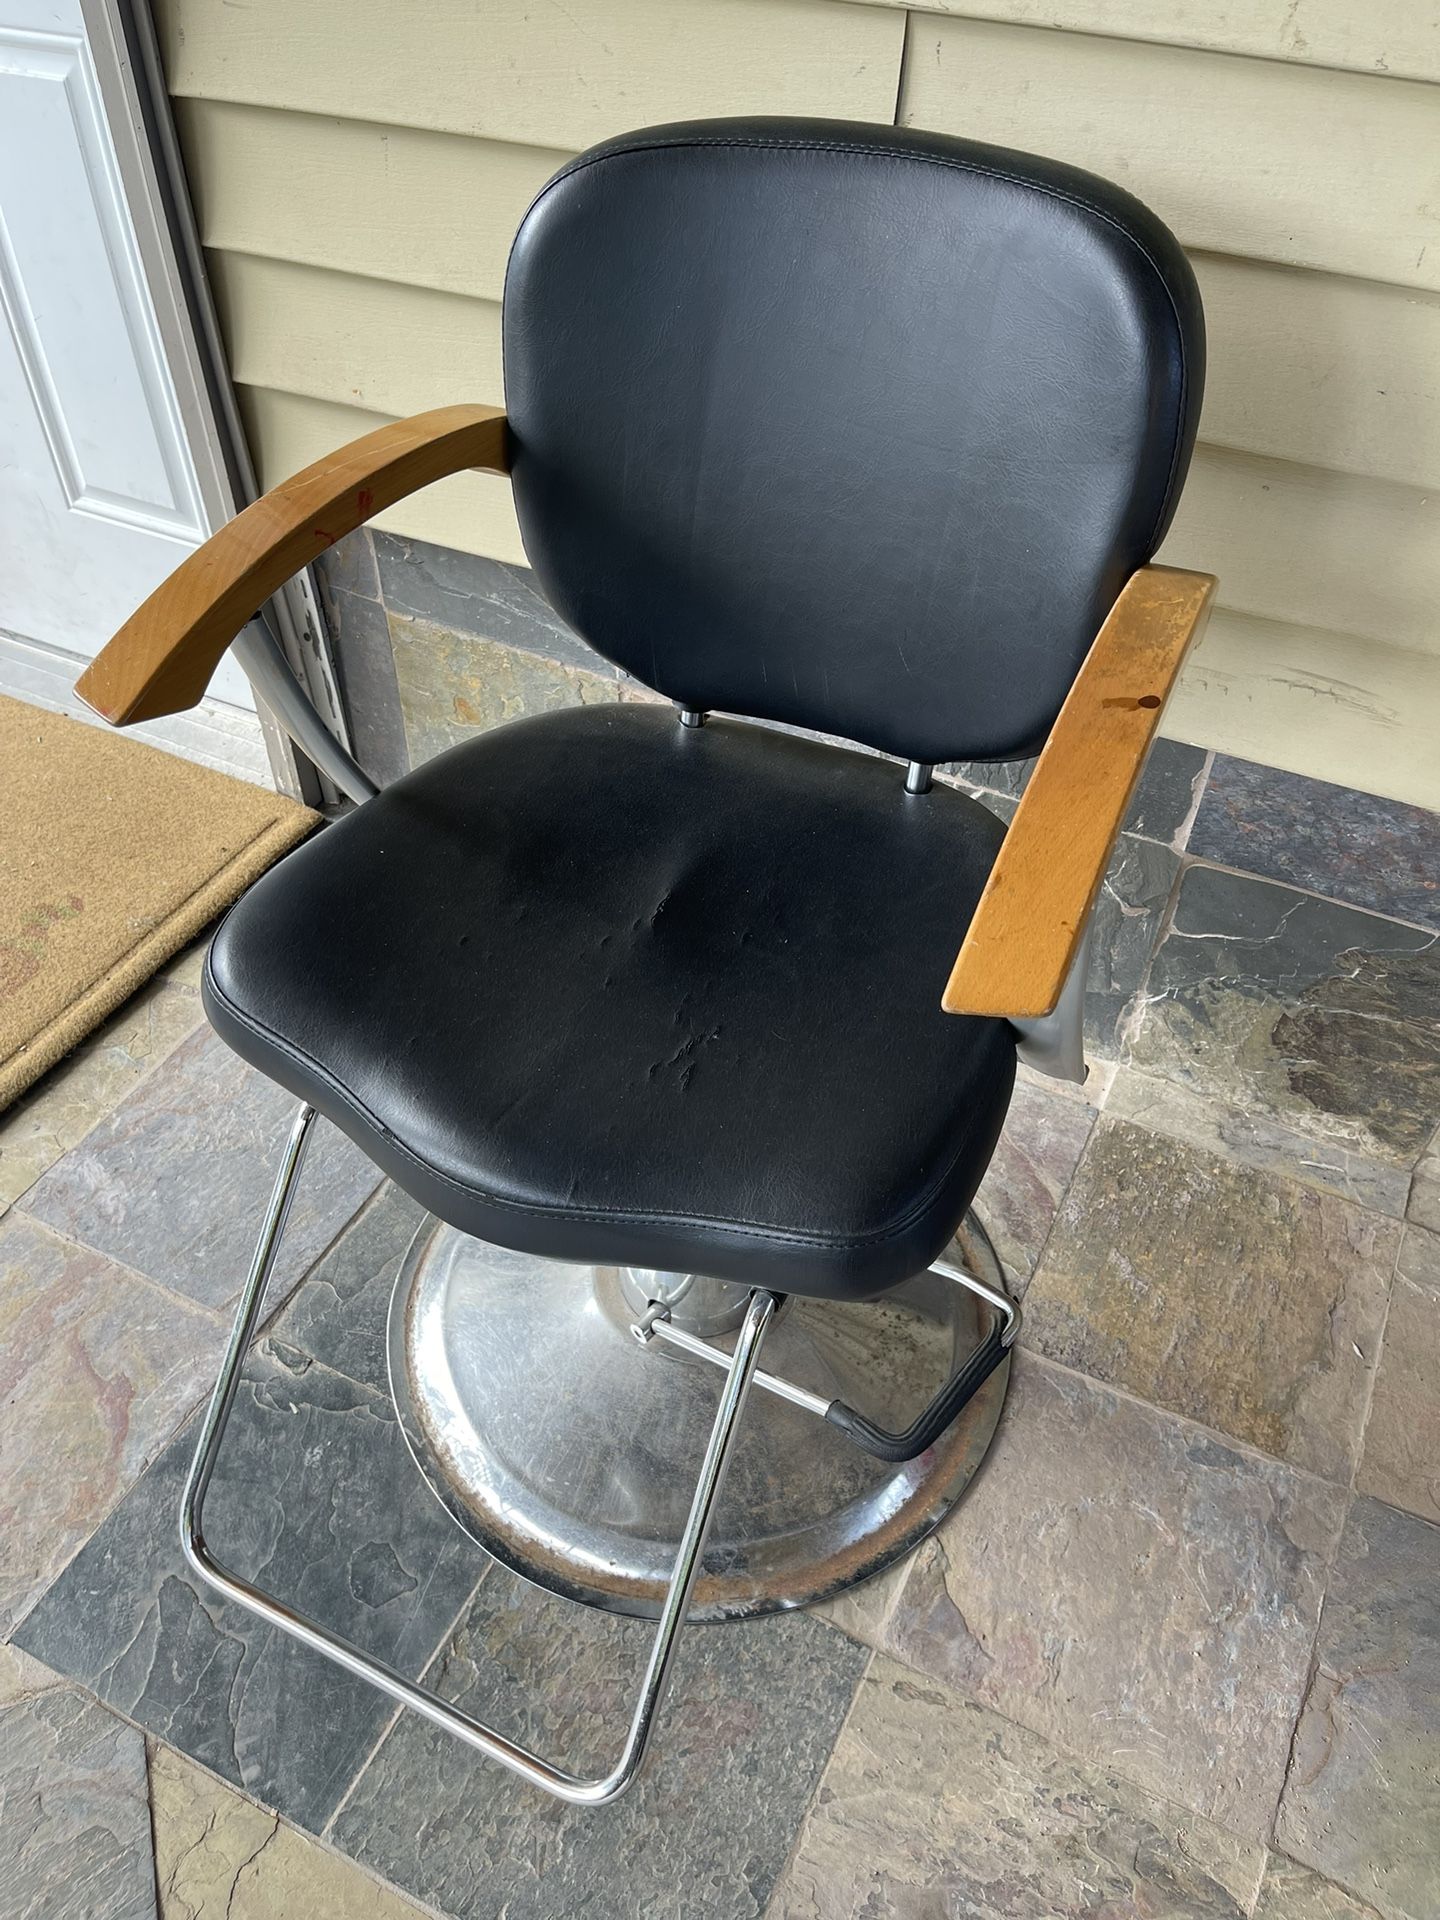 Barber/Hairstylist Chair